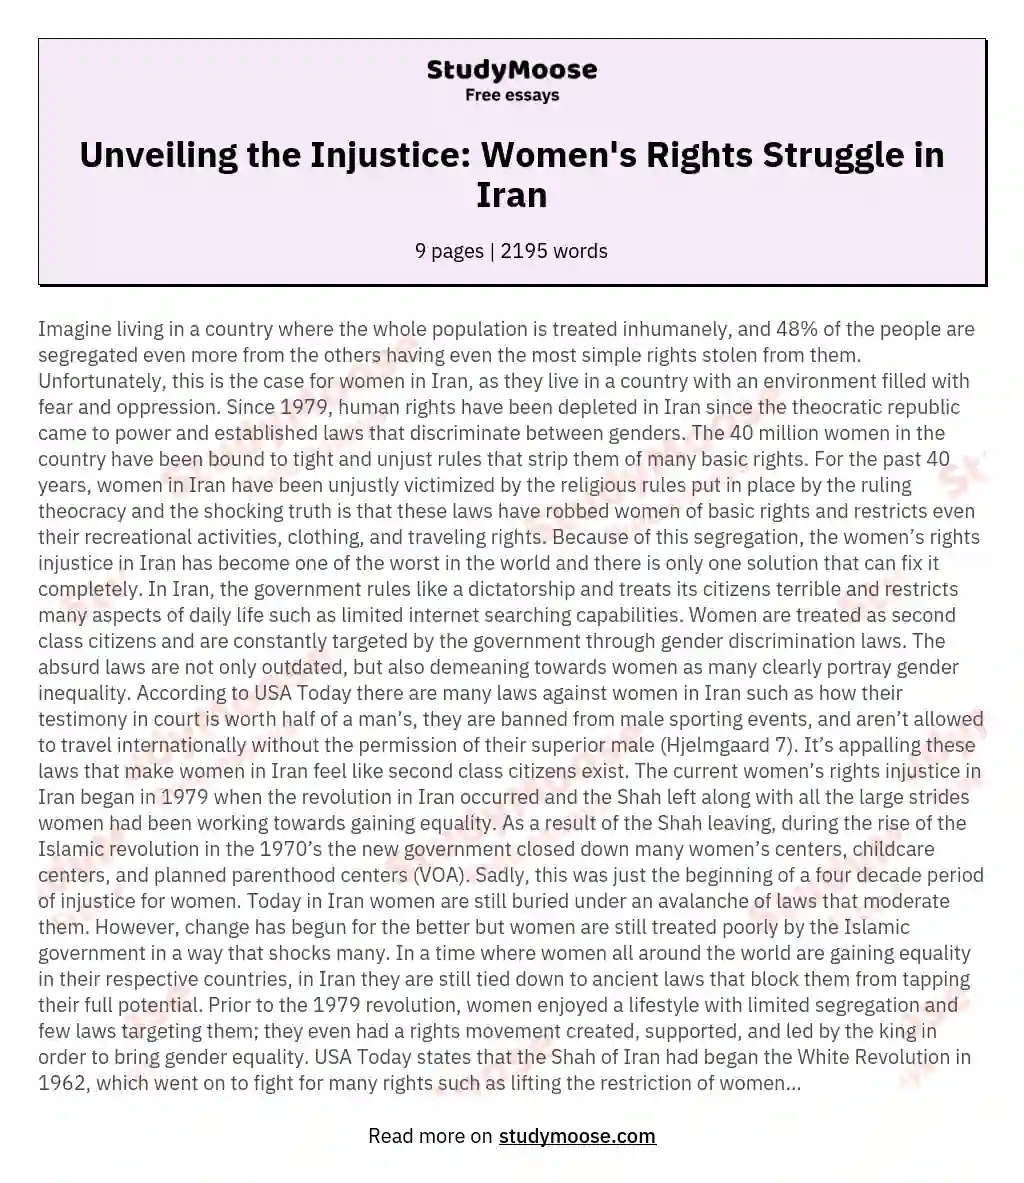 Unveiling the Injustice: Women's Rights Struggle in Iran essay